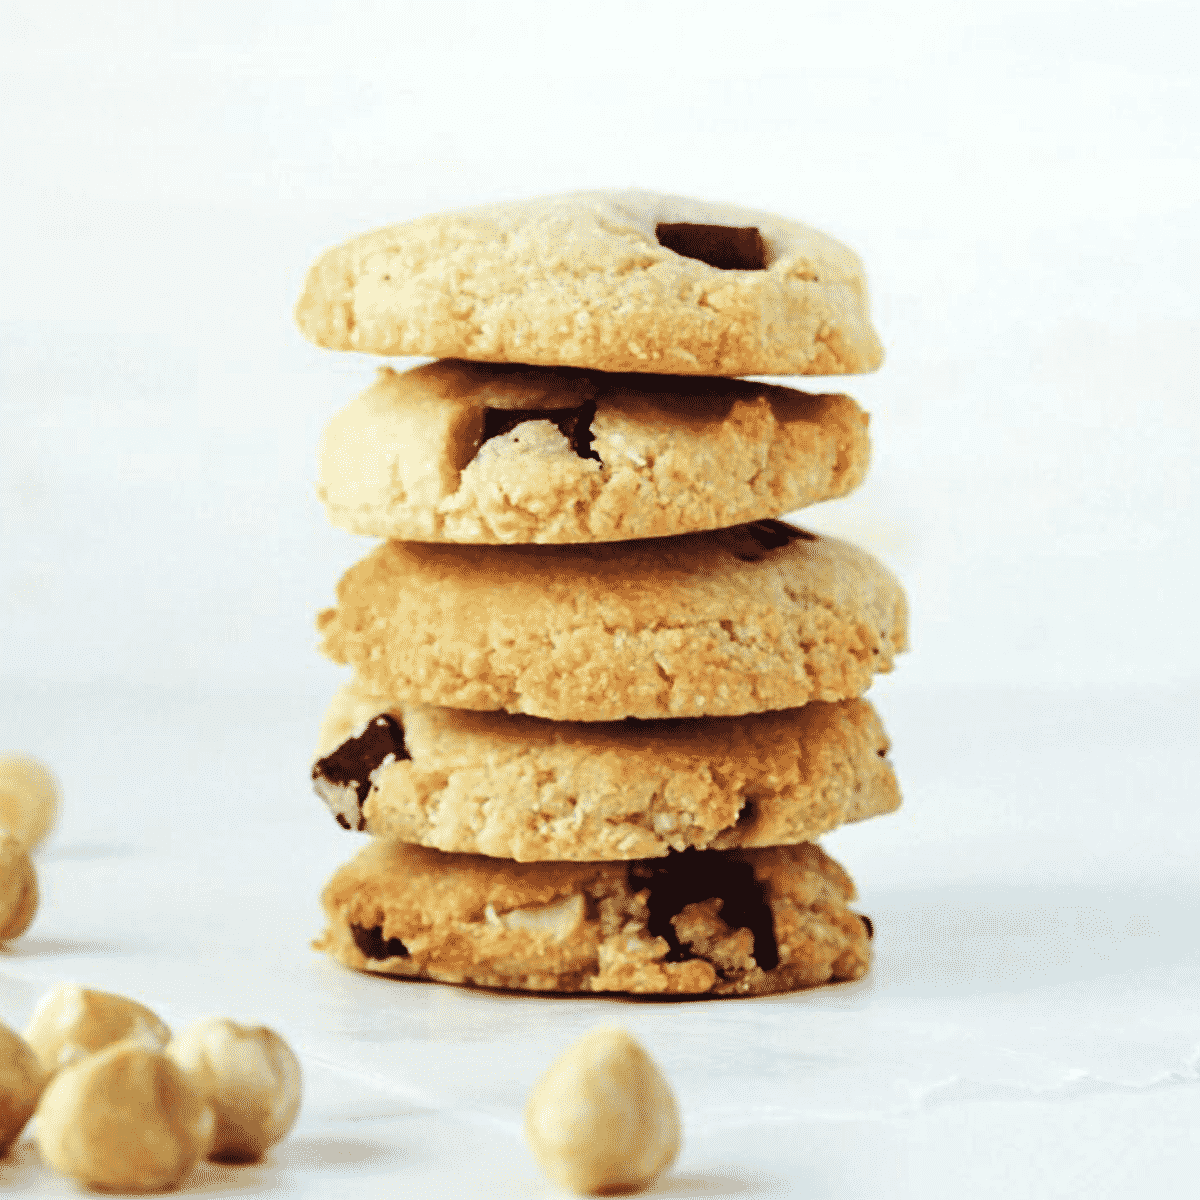 Delicious grain-free chocolate chip cookies with almond flour and hazelnuts. Easy to make and some of the best gluten-free cookies I've tried!